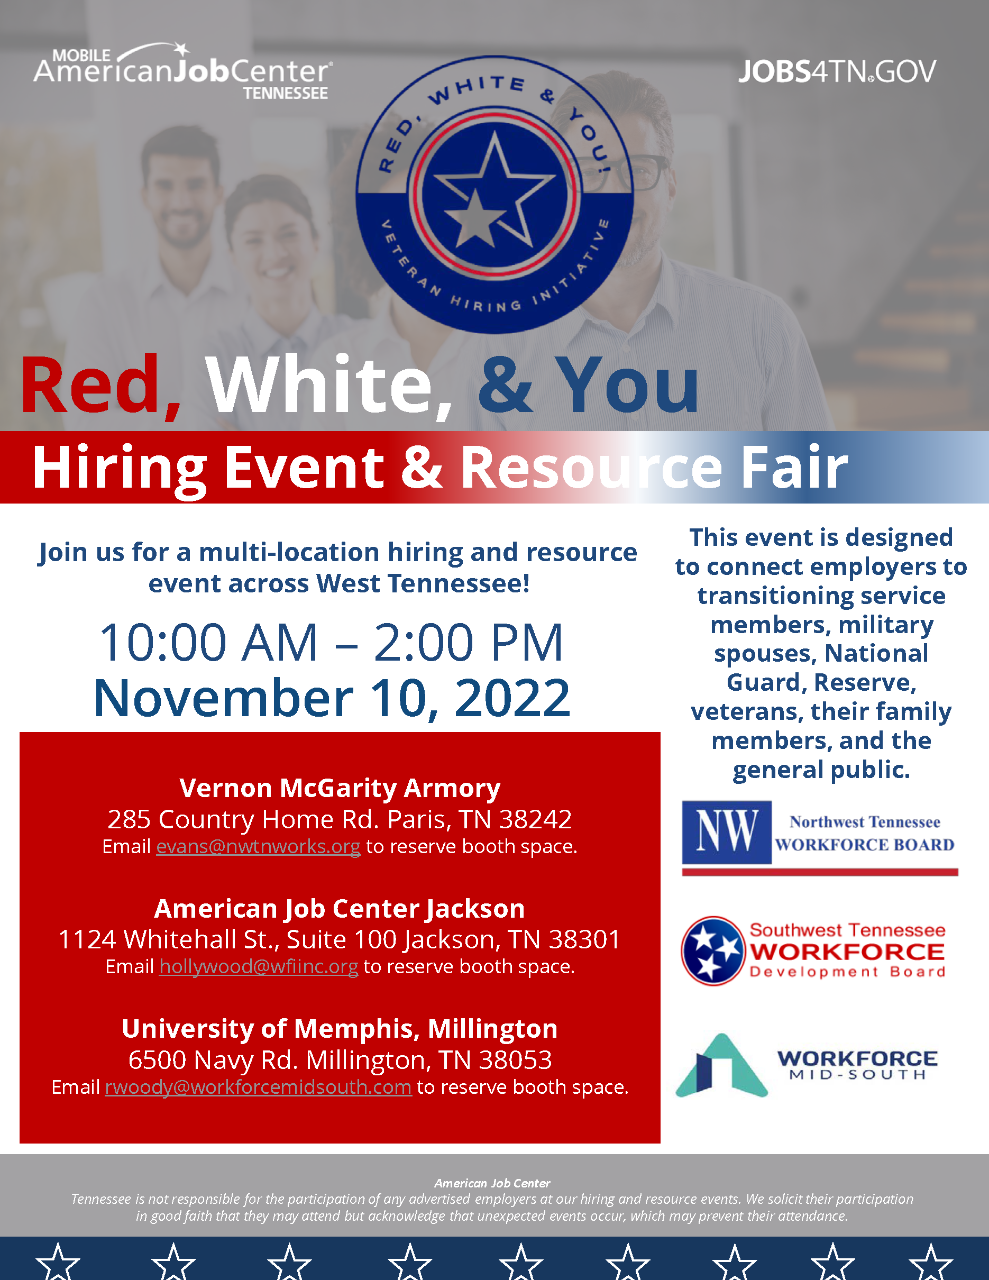 Red, White, & You Hiring Event and Resource Fair